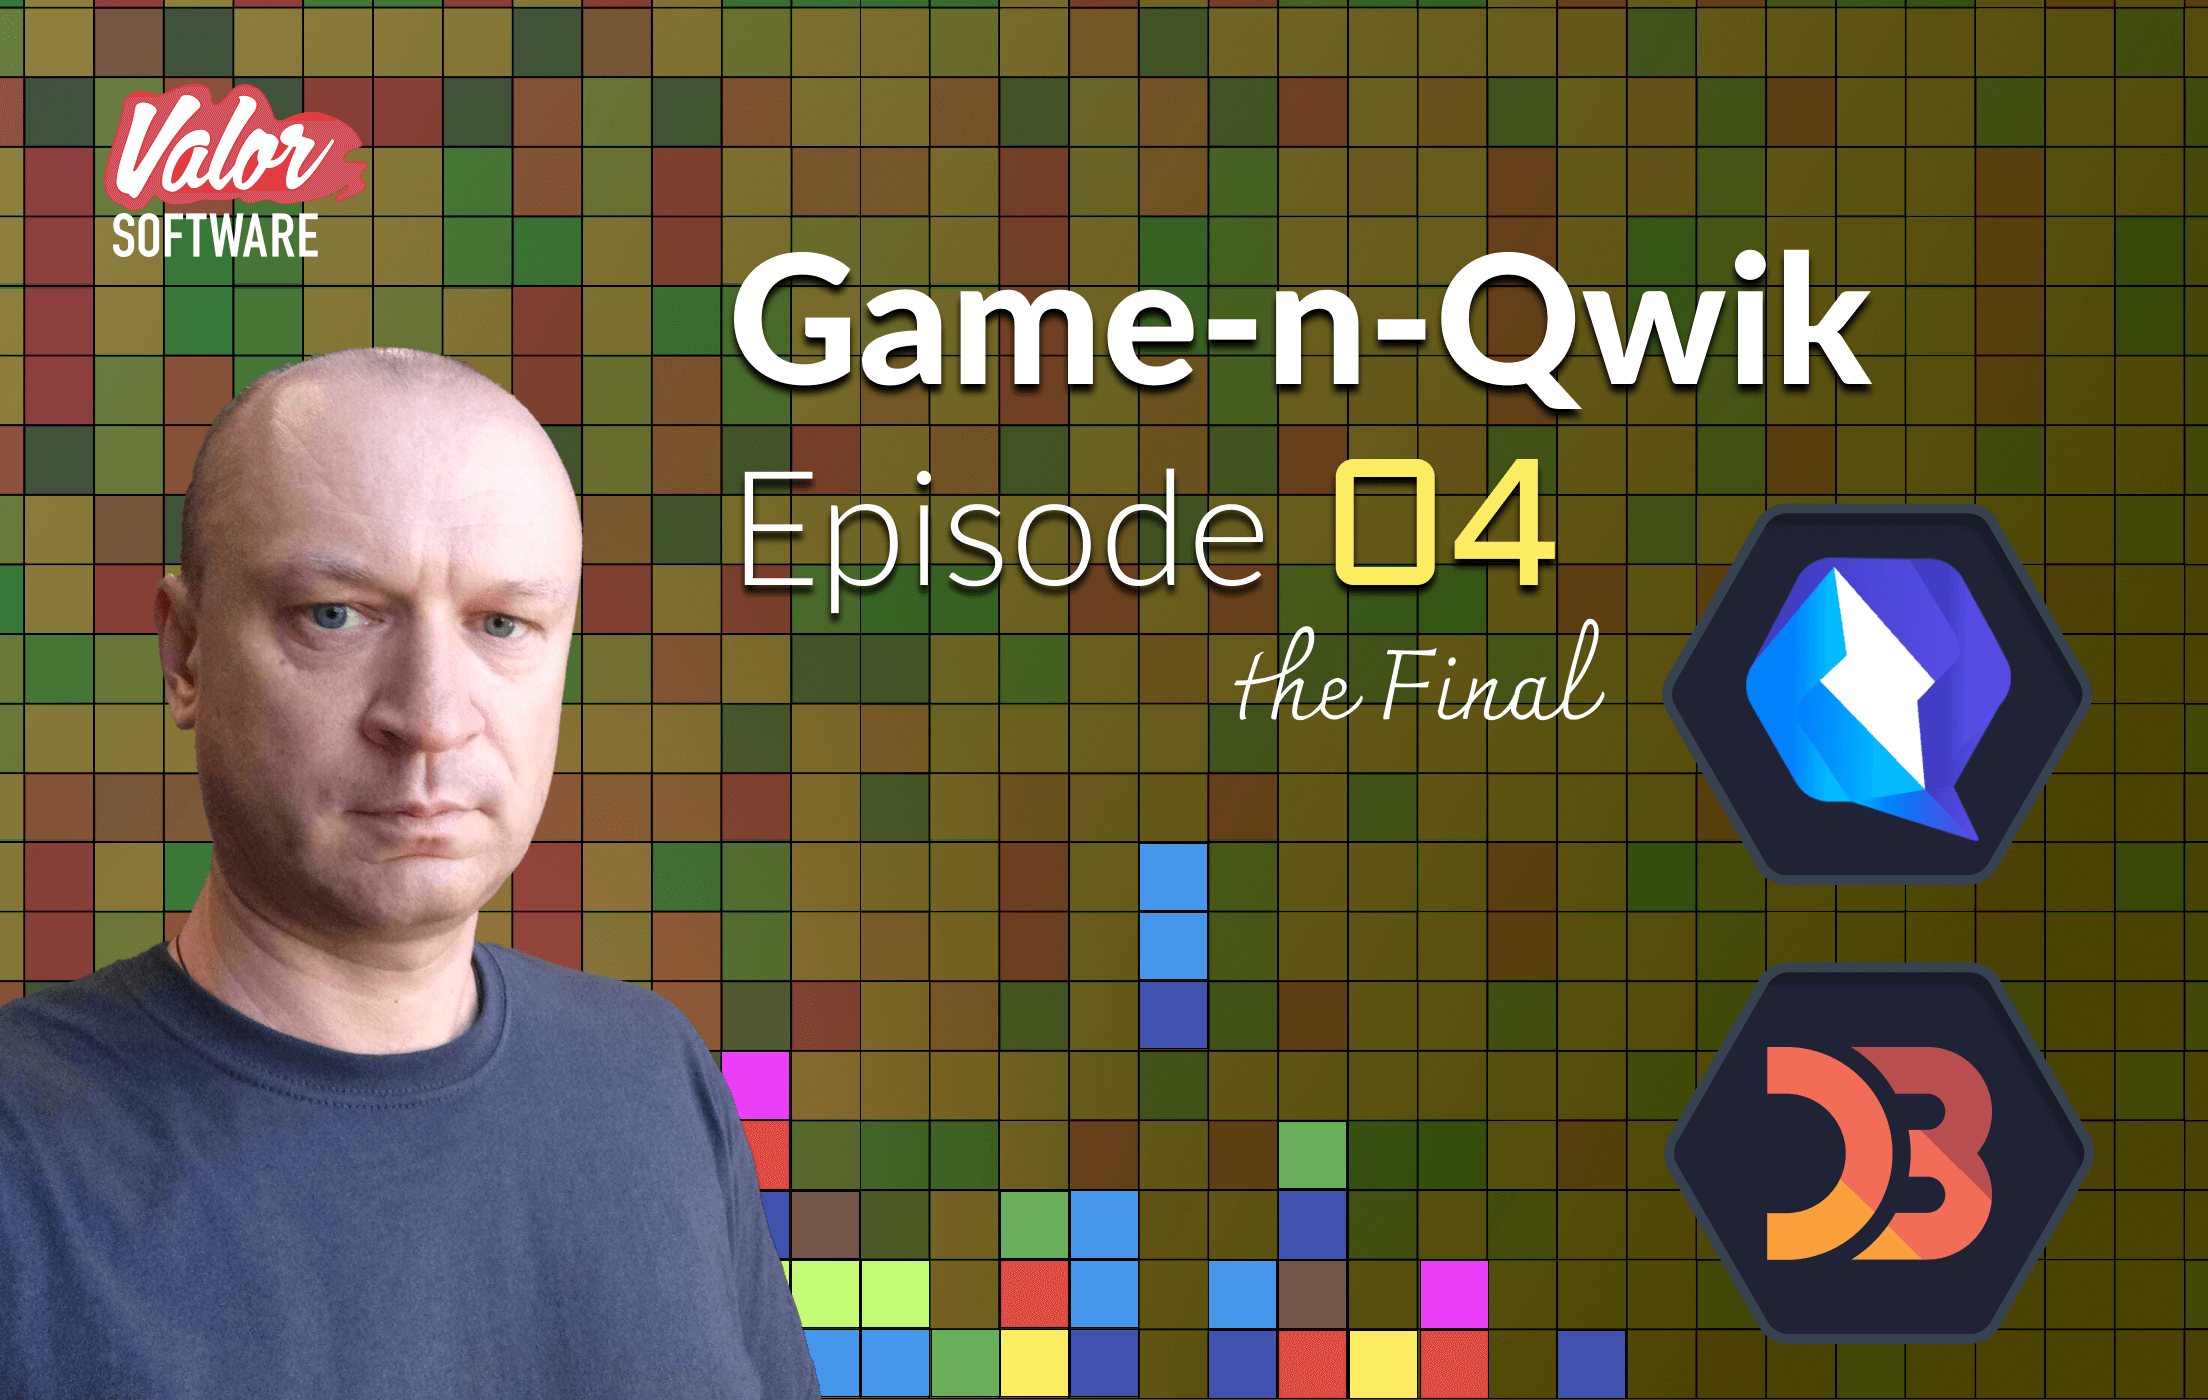 Game-n-Qwik. The Final Episode.